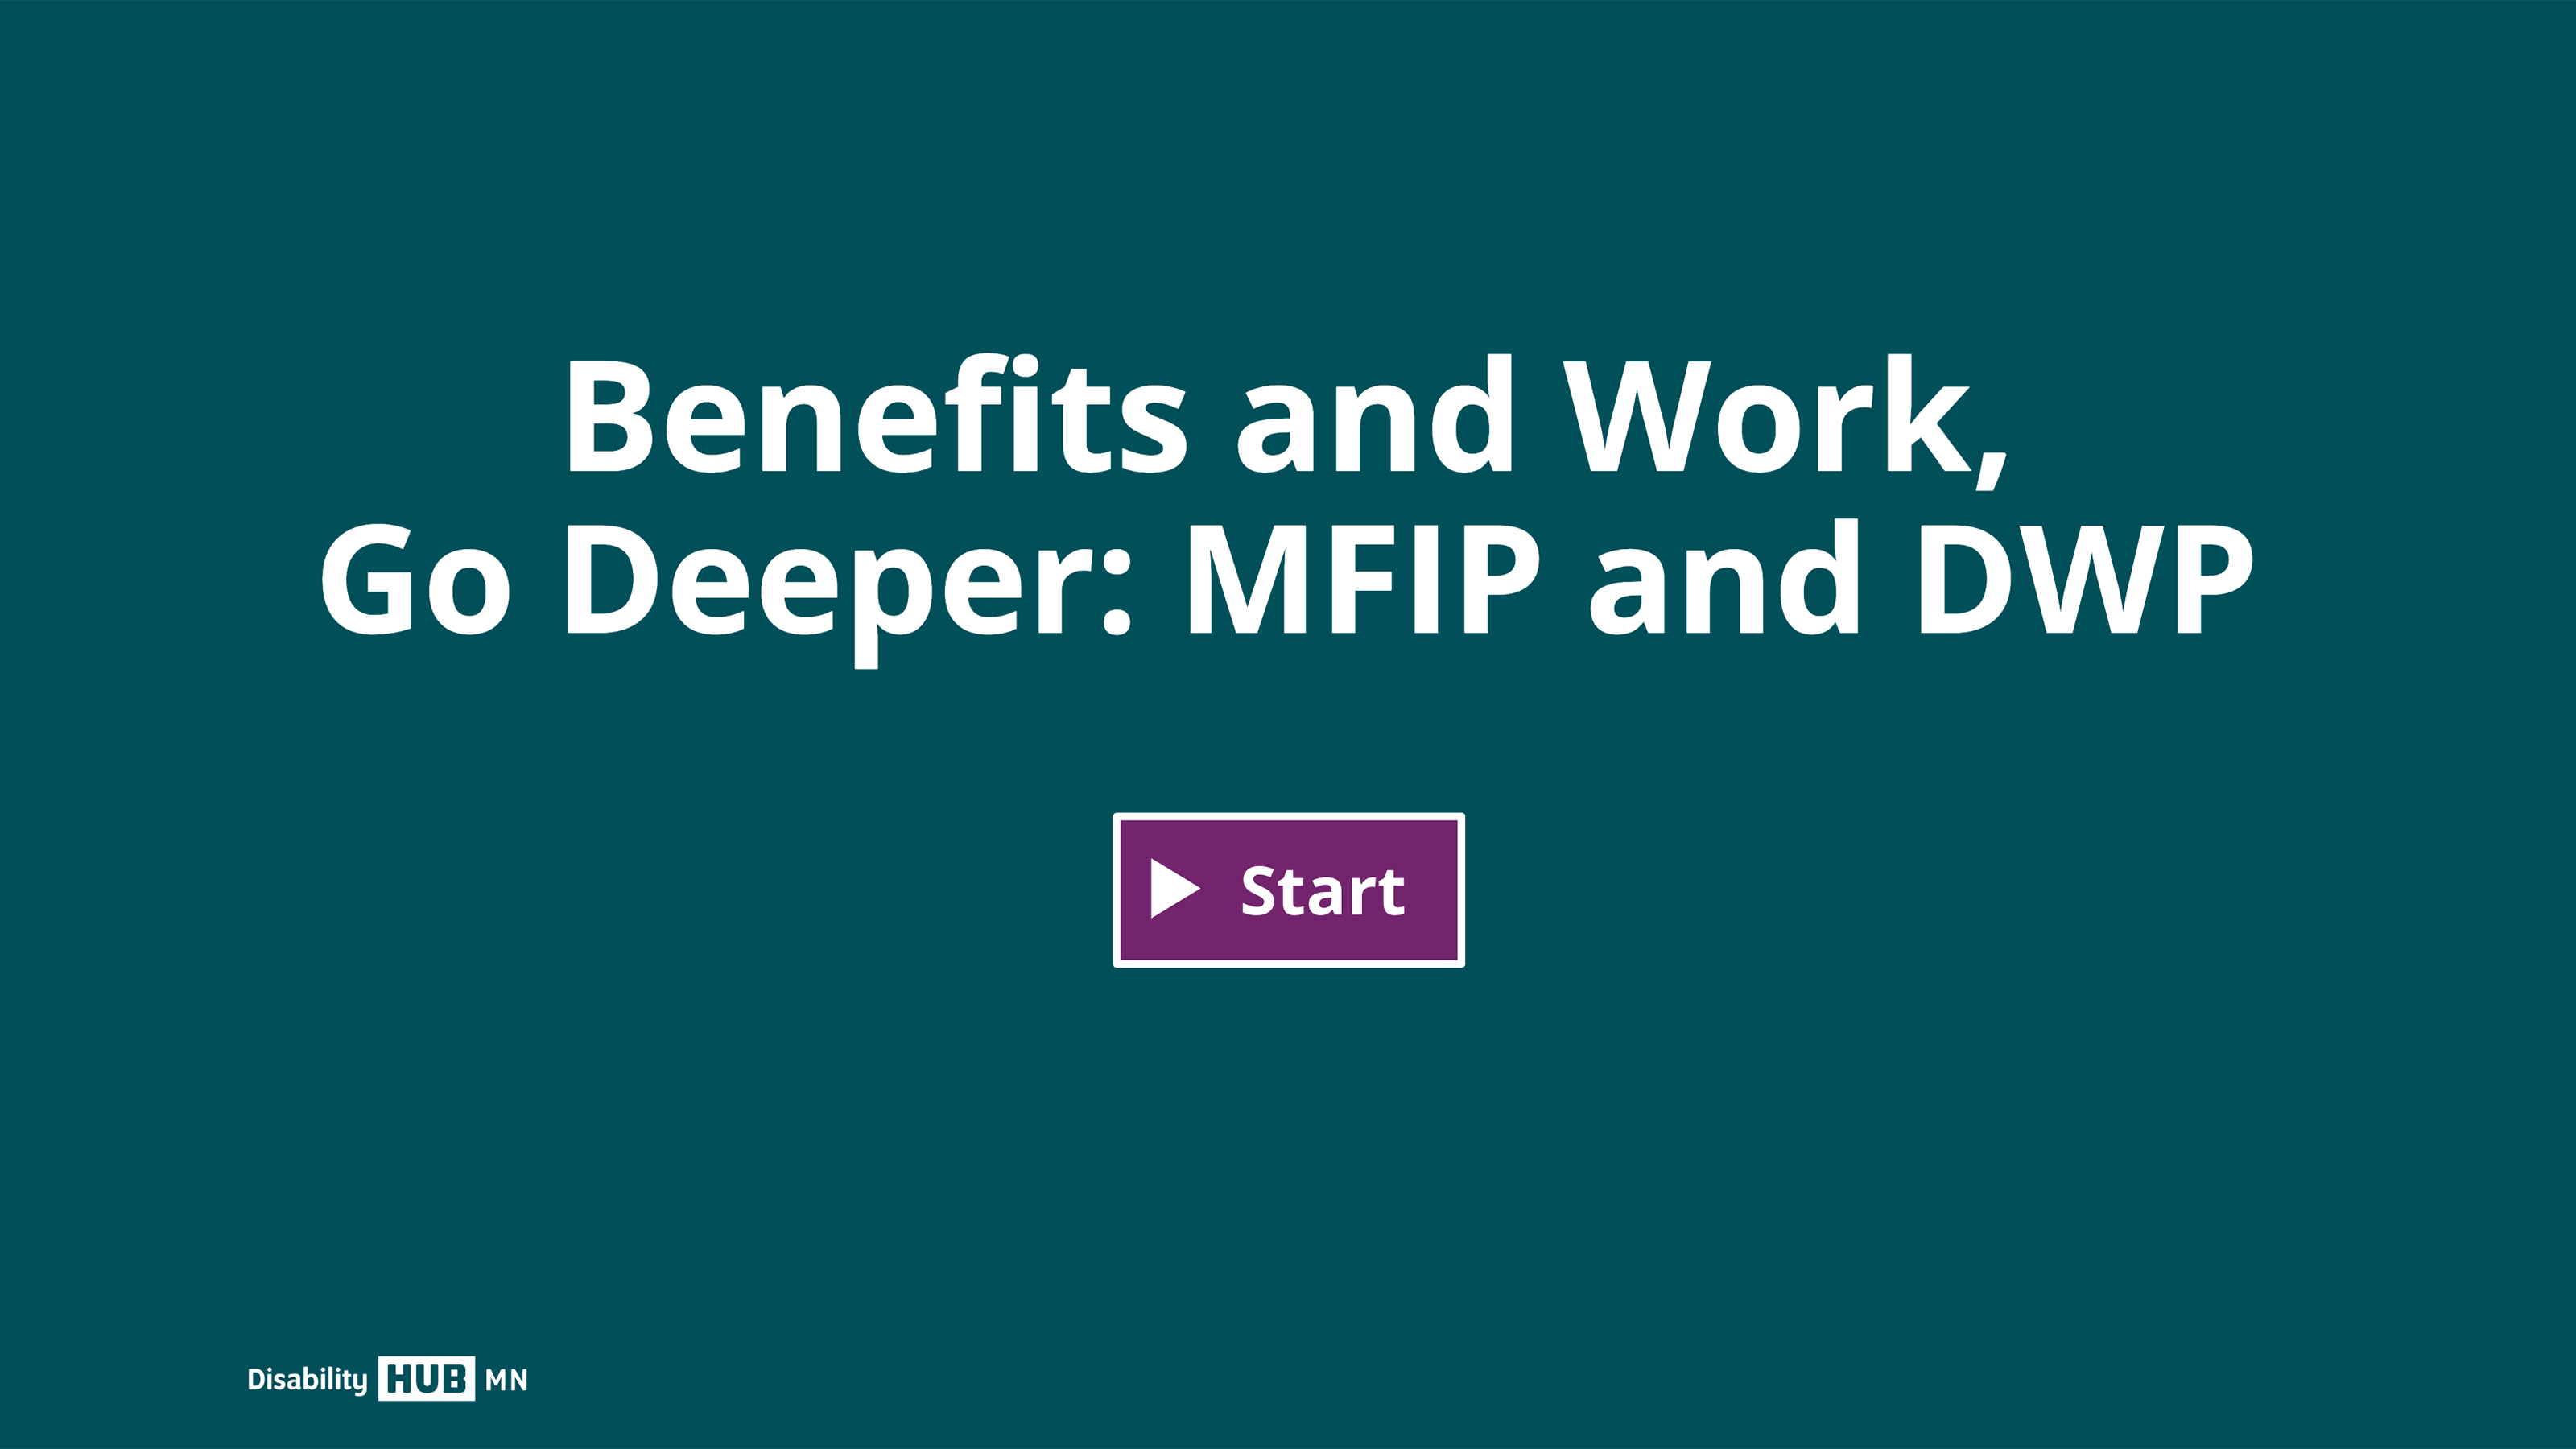 Click this image to begin the Benefits and Work, Go Deeper: MFIP and DWP e-learning